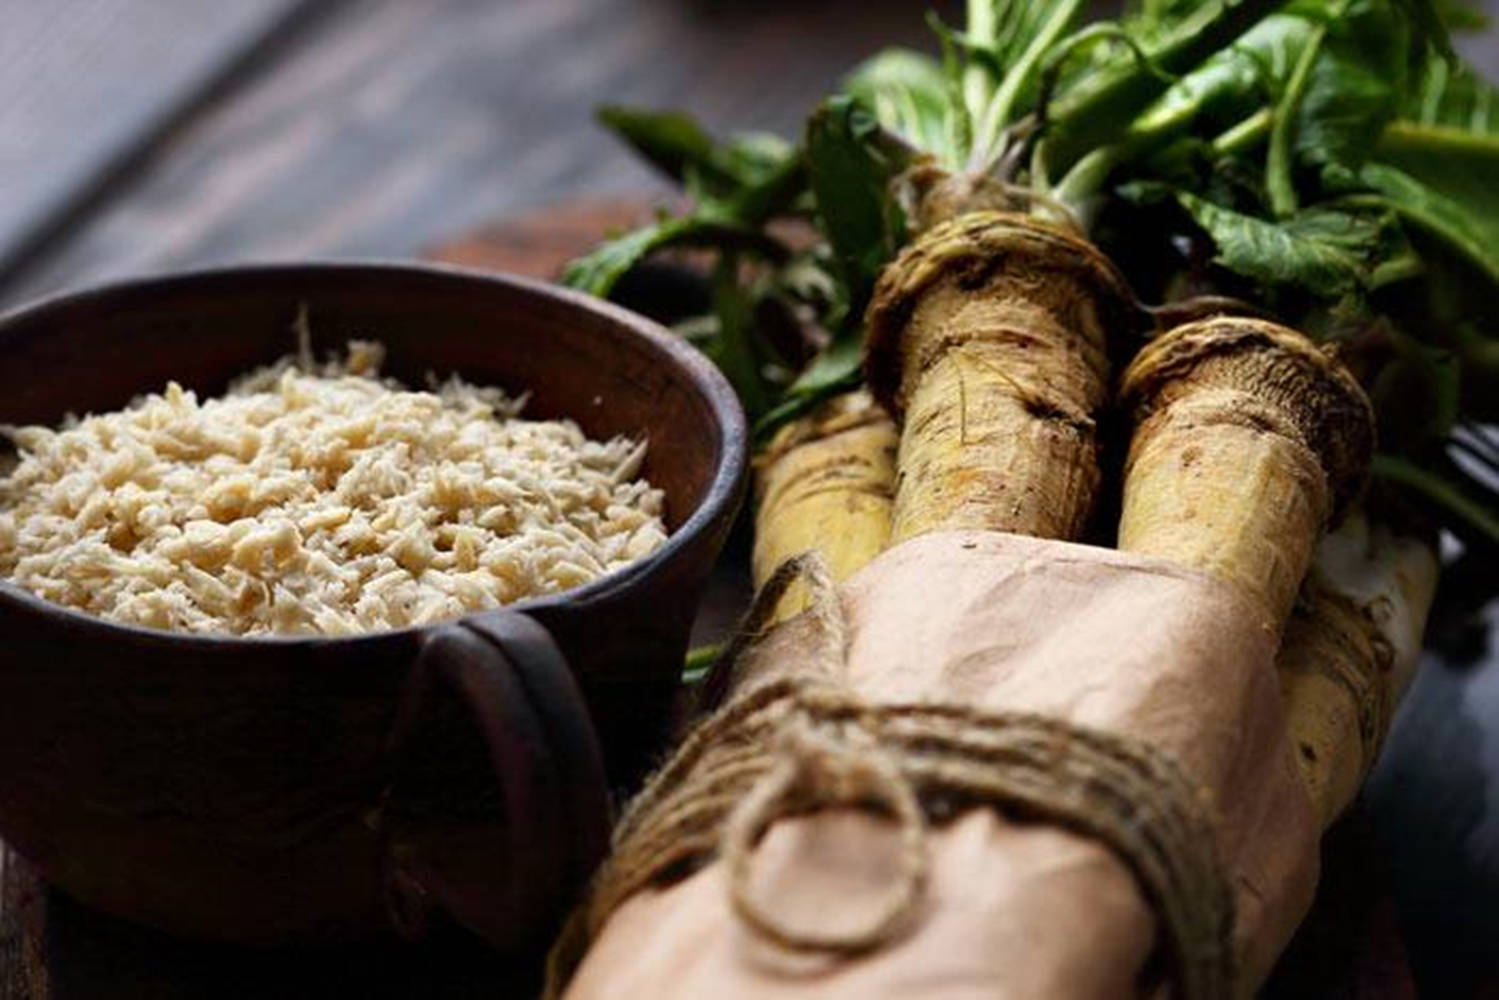 download-tied-up-horseradish-with-bowl-wallpaper-wallpapers